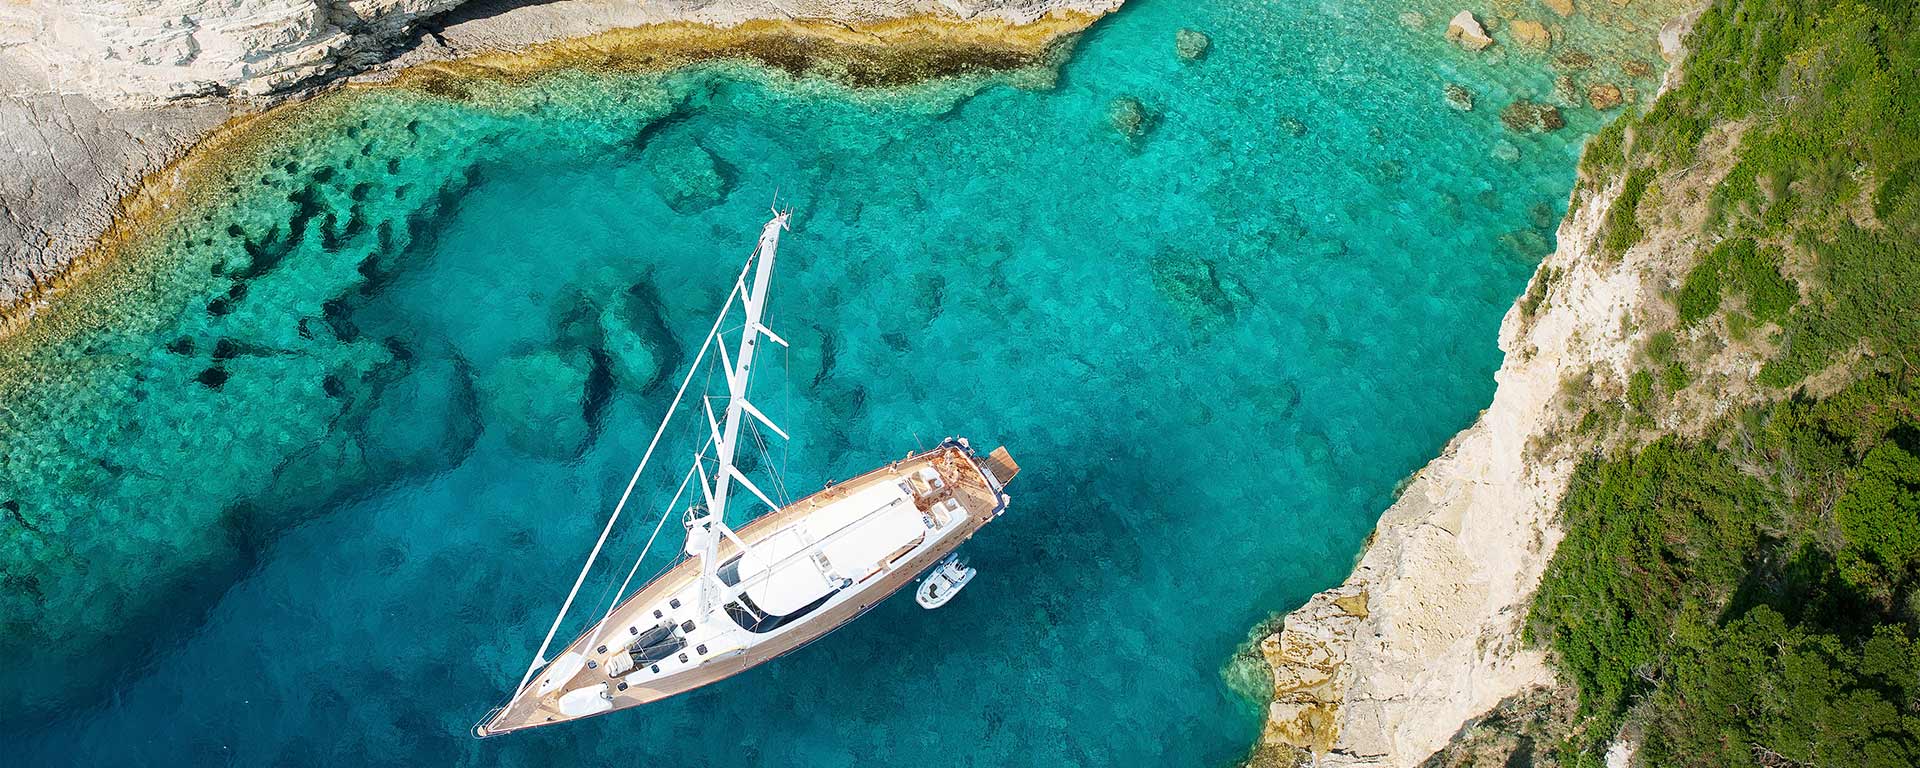 Sail boat on turquoise water